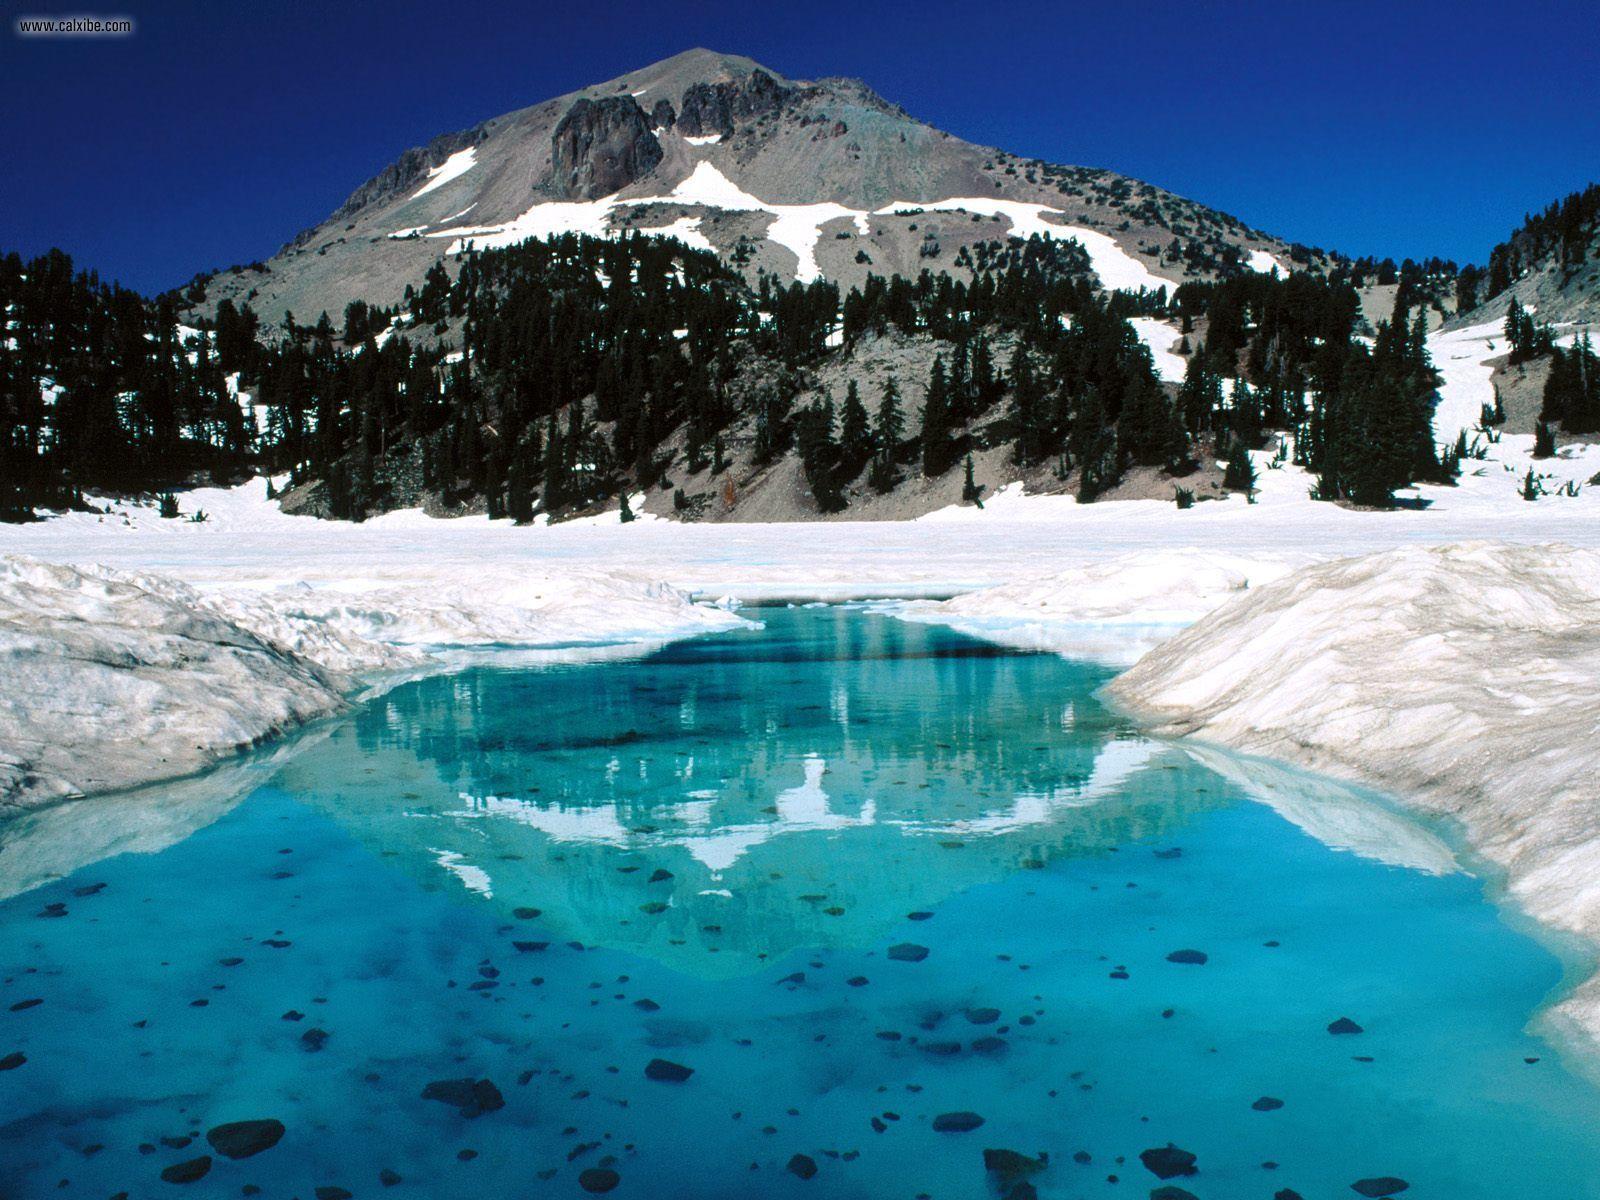 Nature: The Thaw Lassen Volcanic National Park California, picture